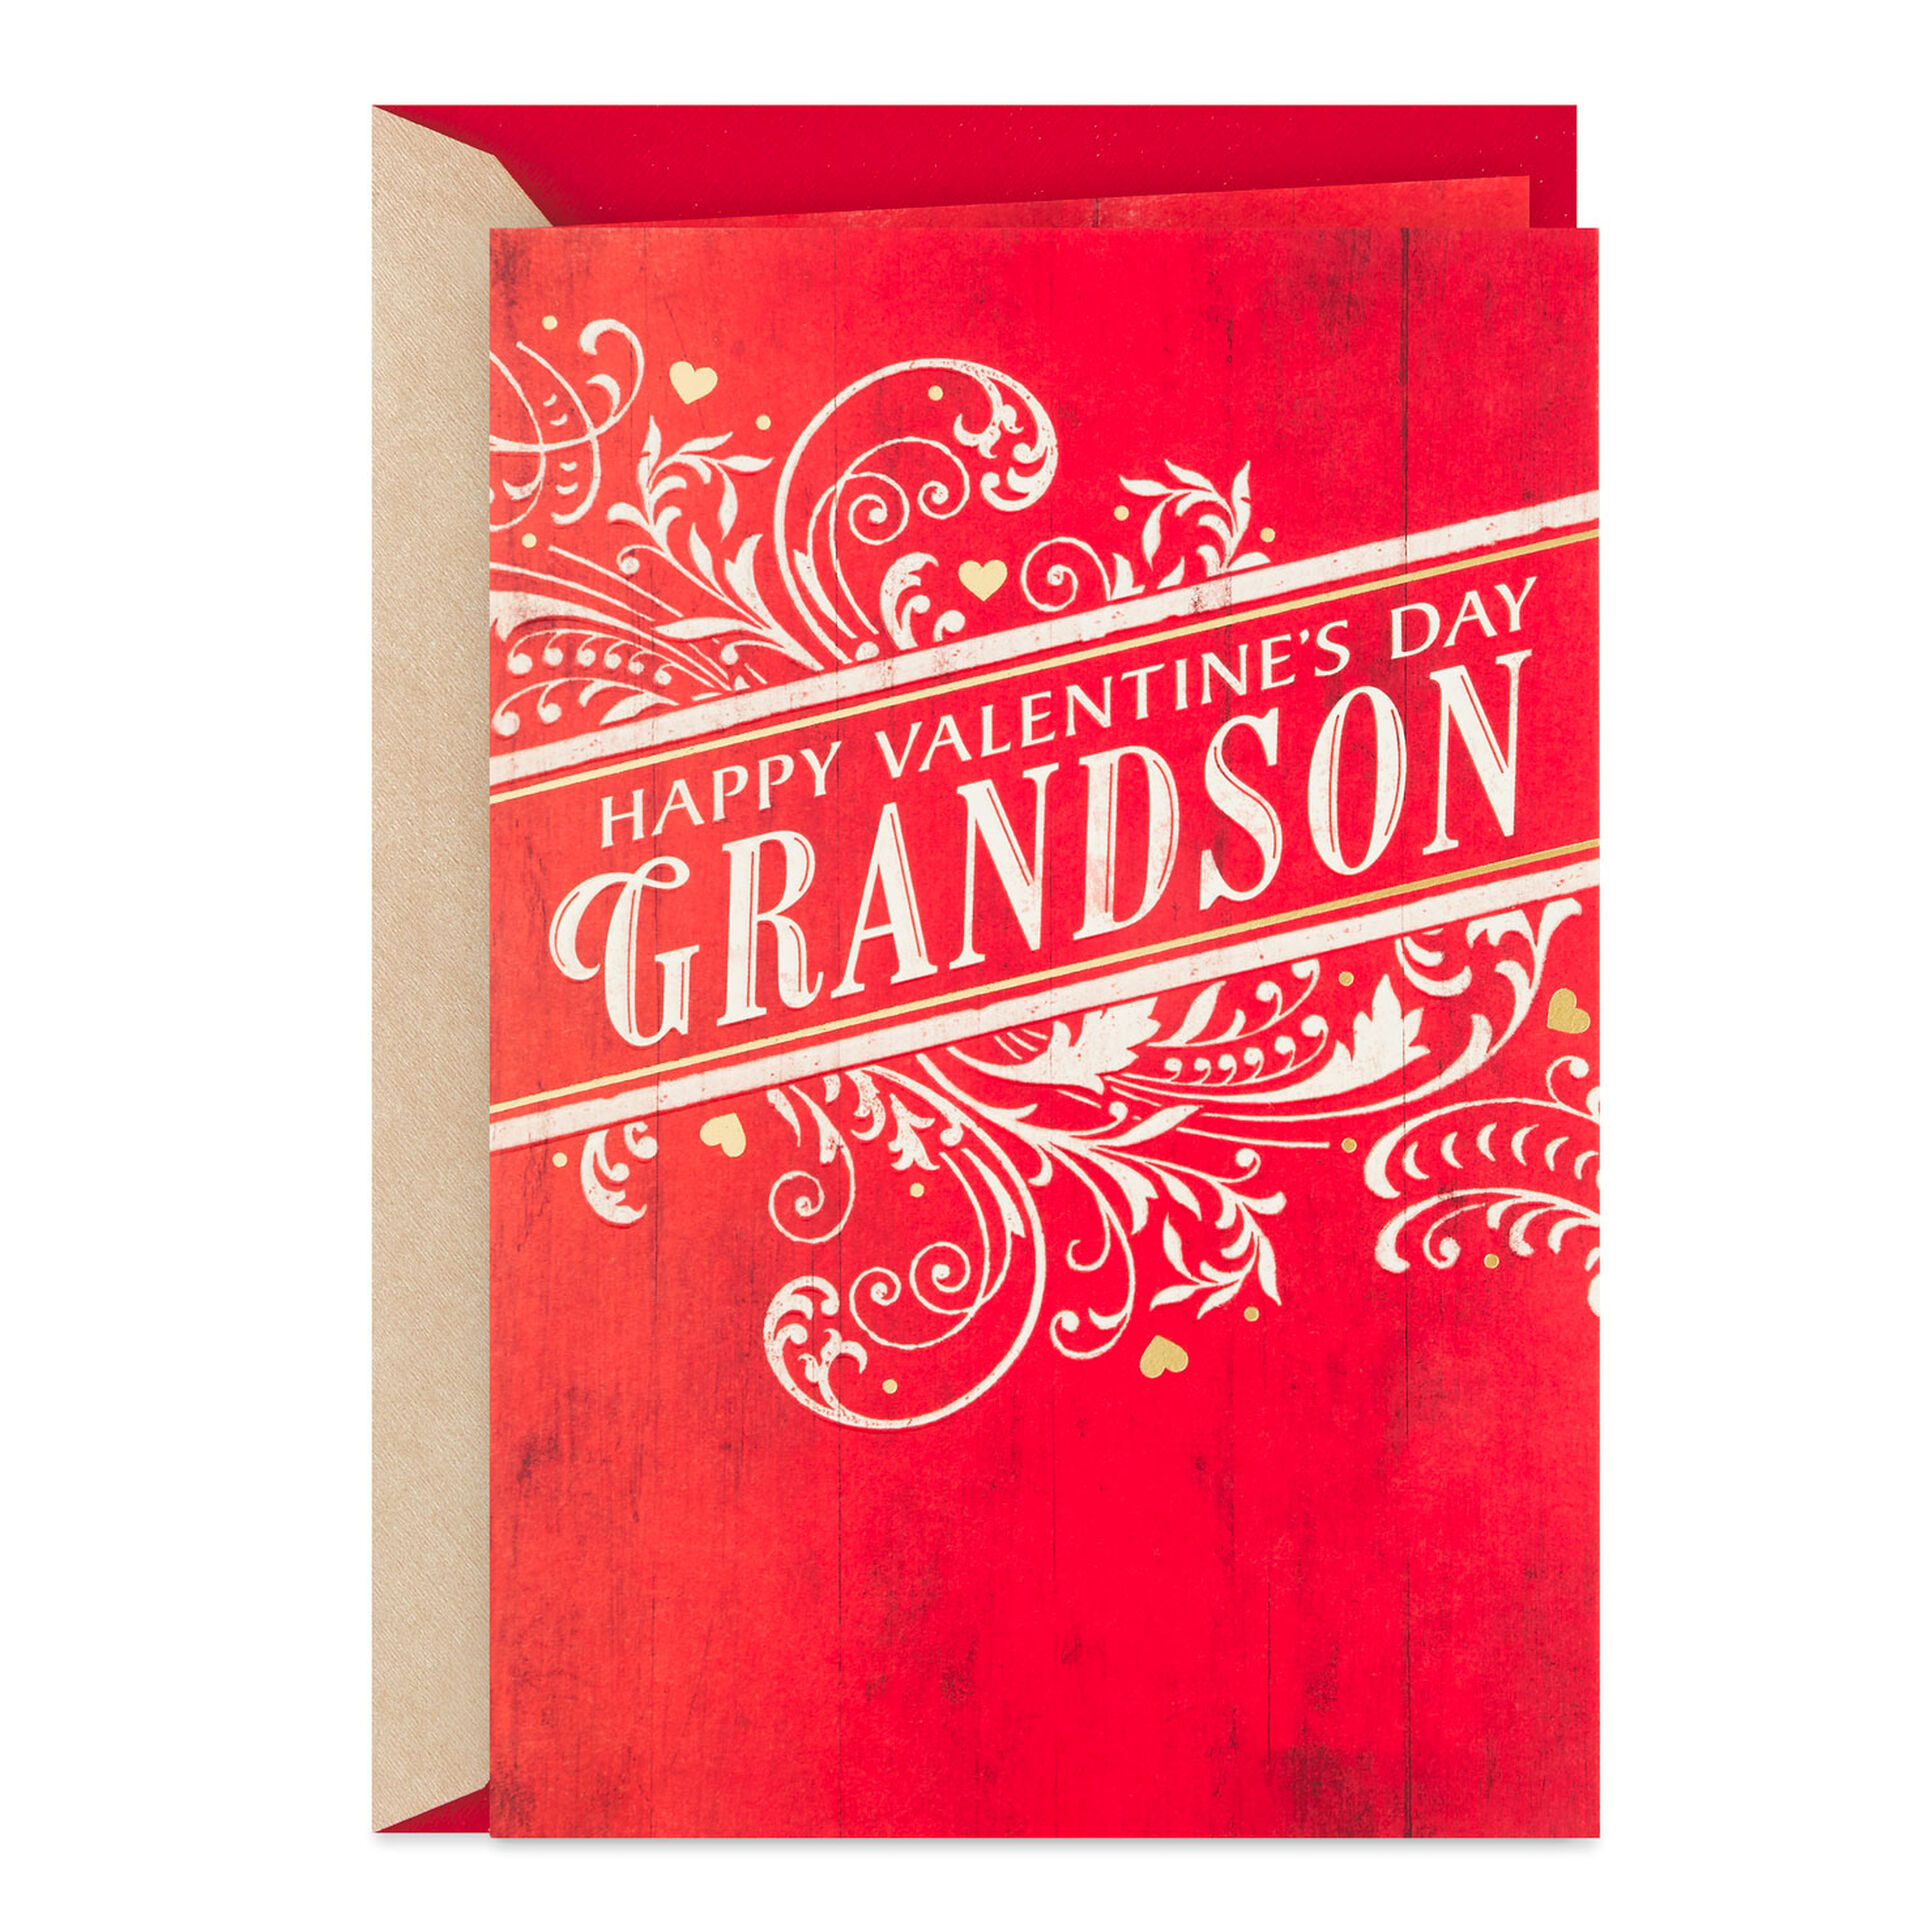 Hearts-and-Swirls-Valentines-Day-Card-for-Grandson_359VEE7566_01